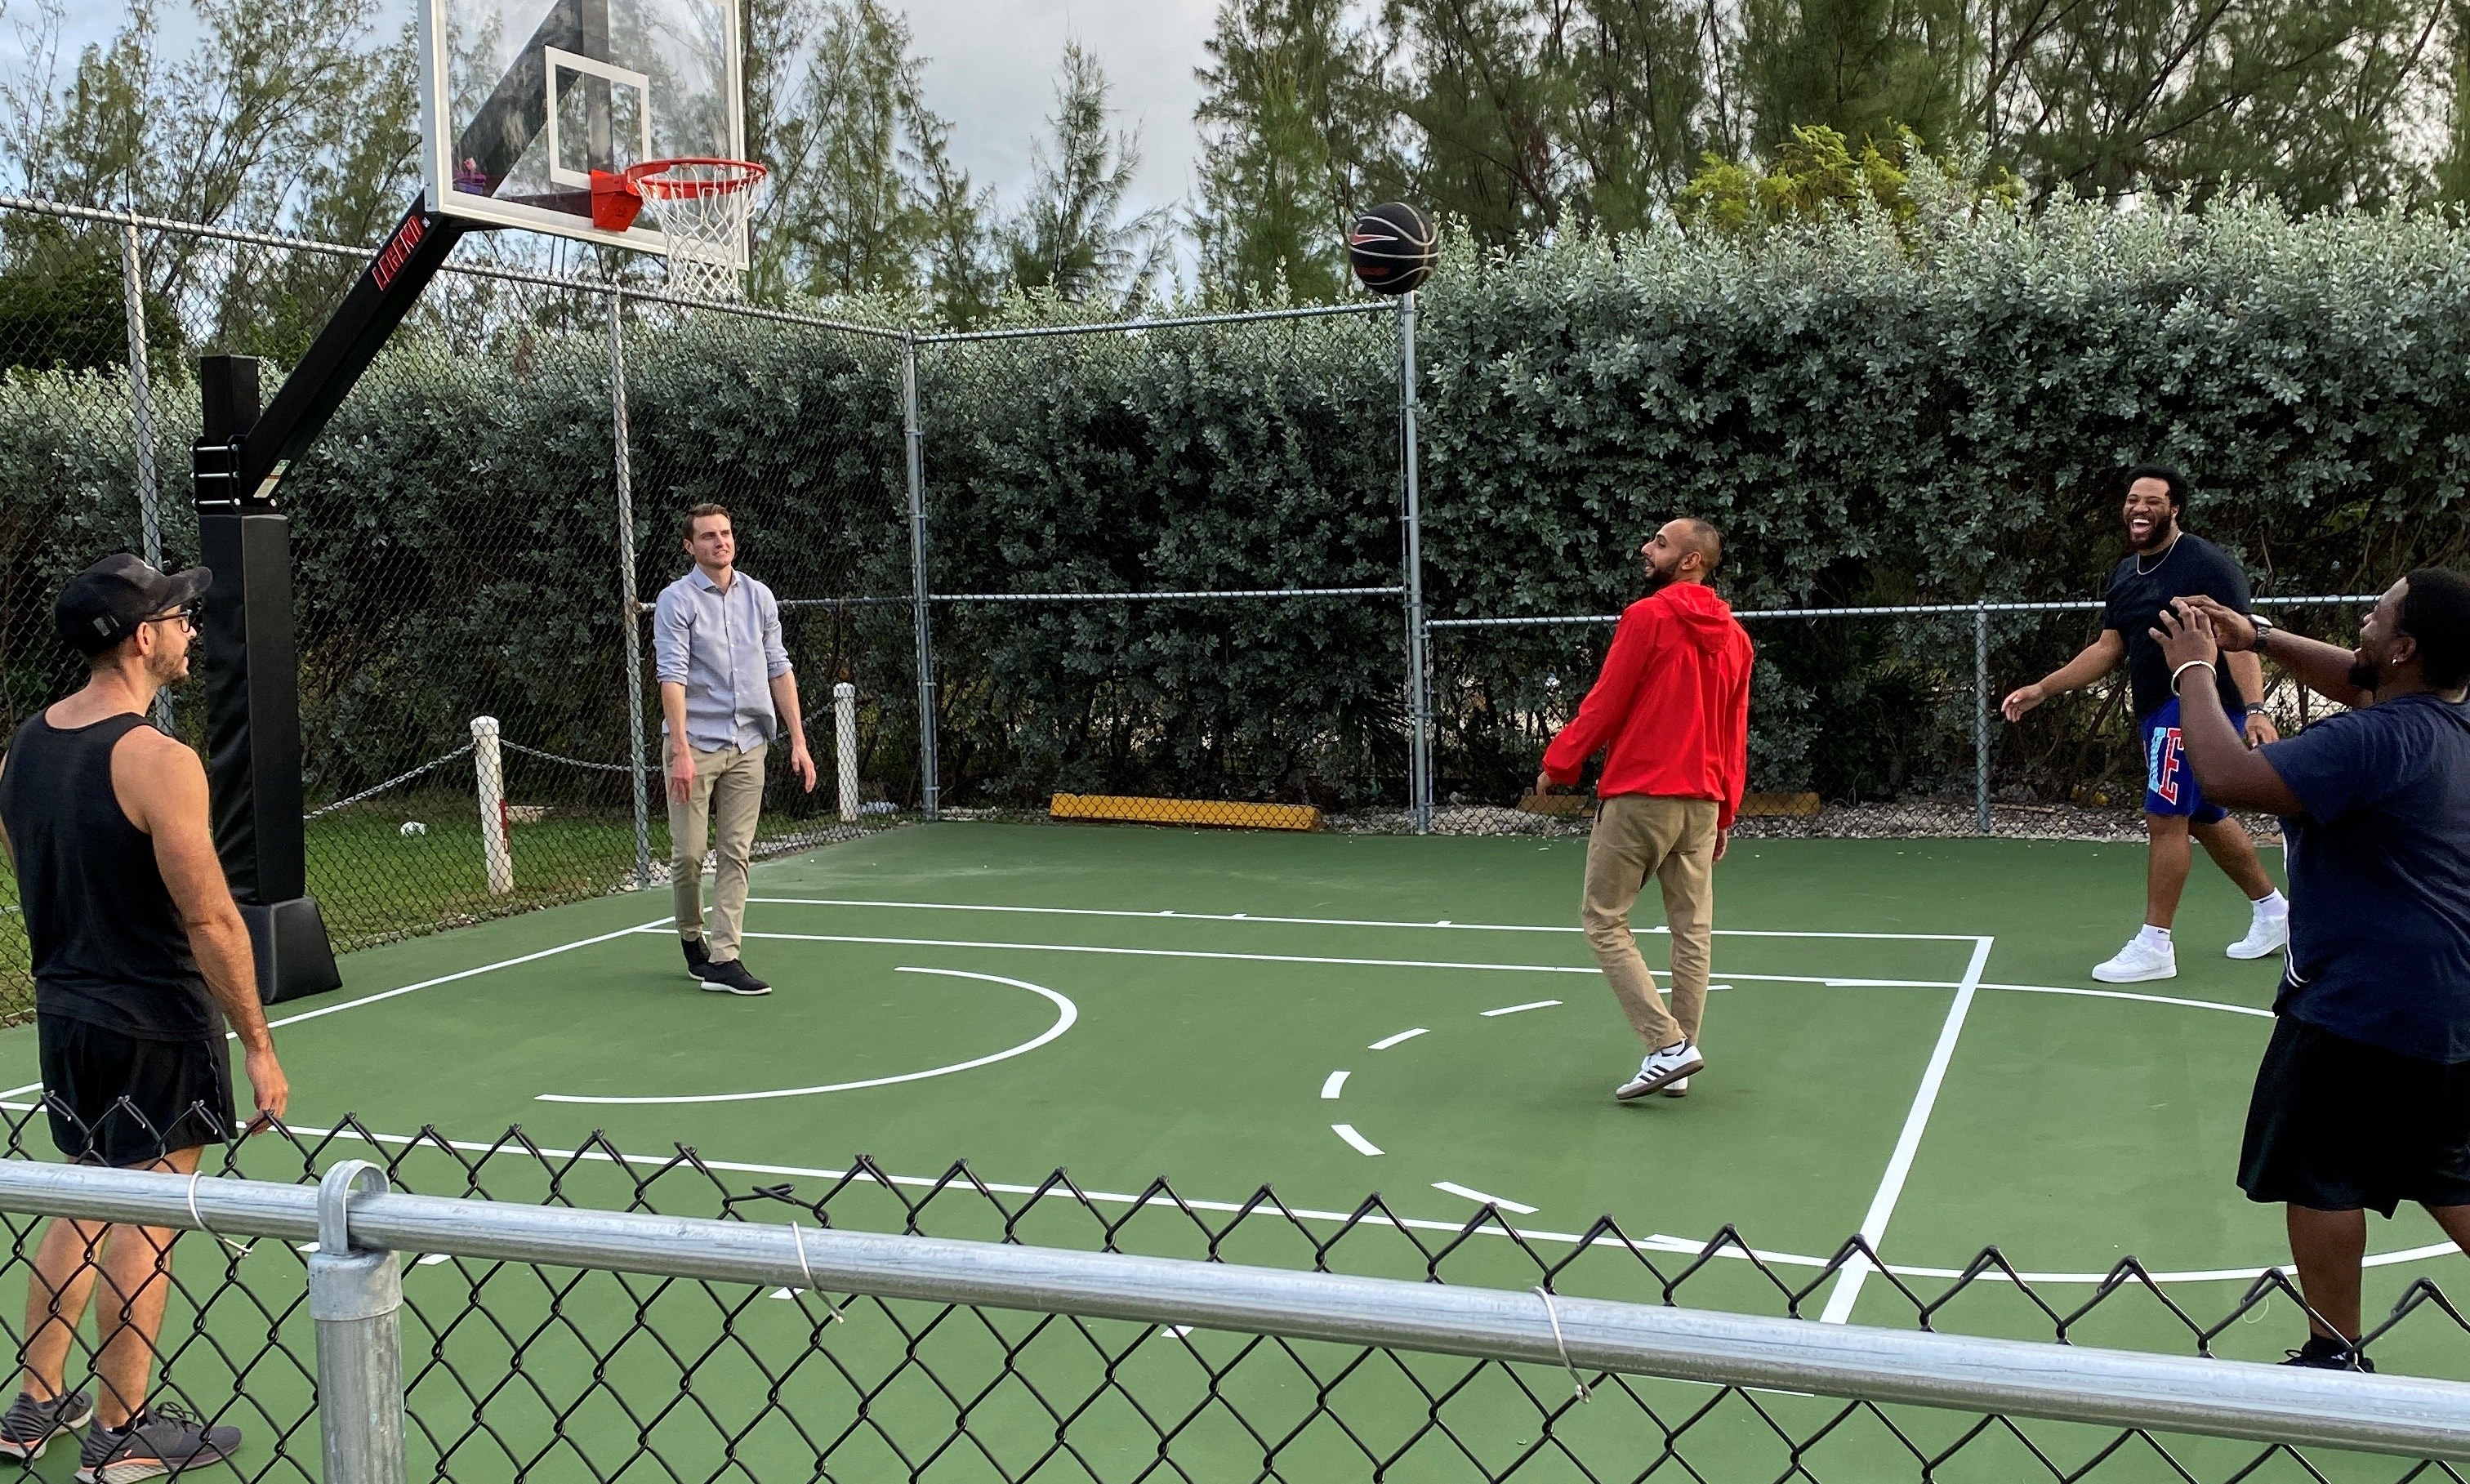 SMU students take time out from studying to play some basketball